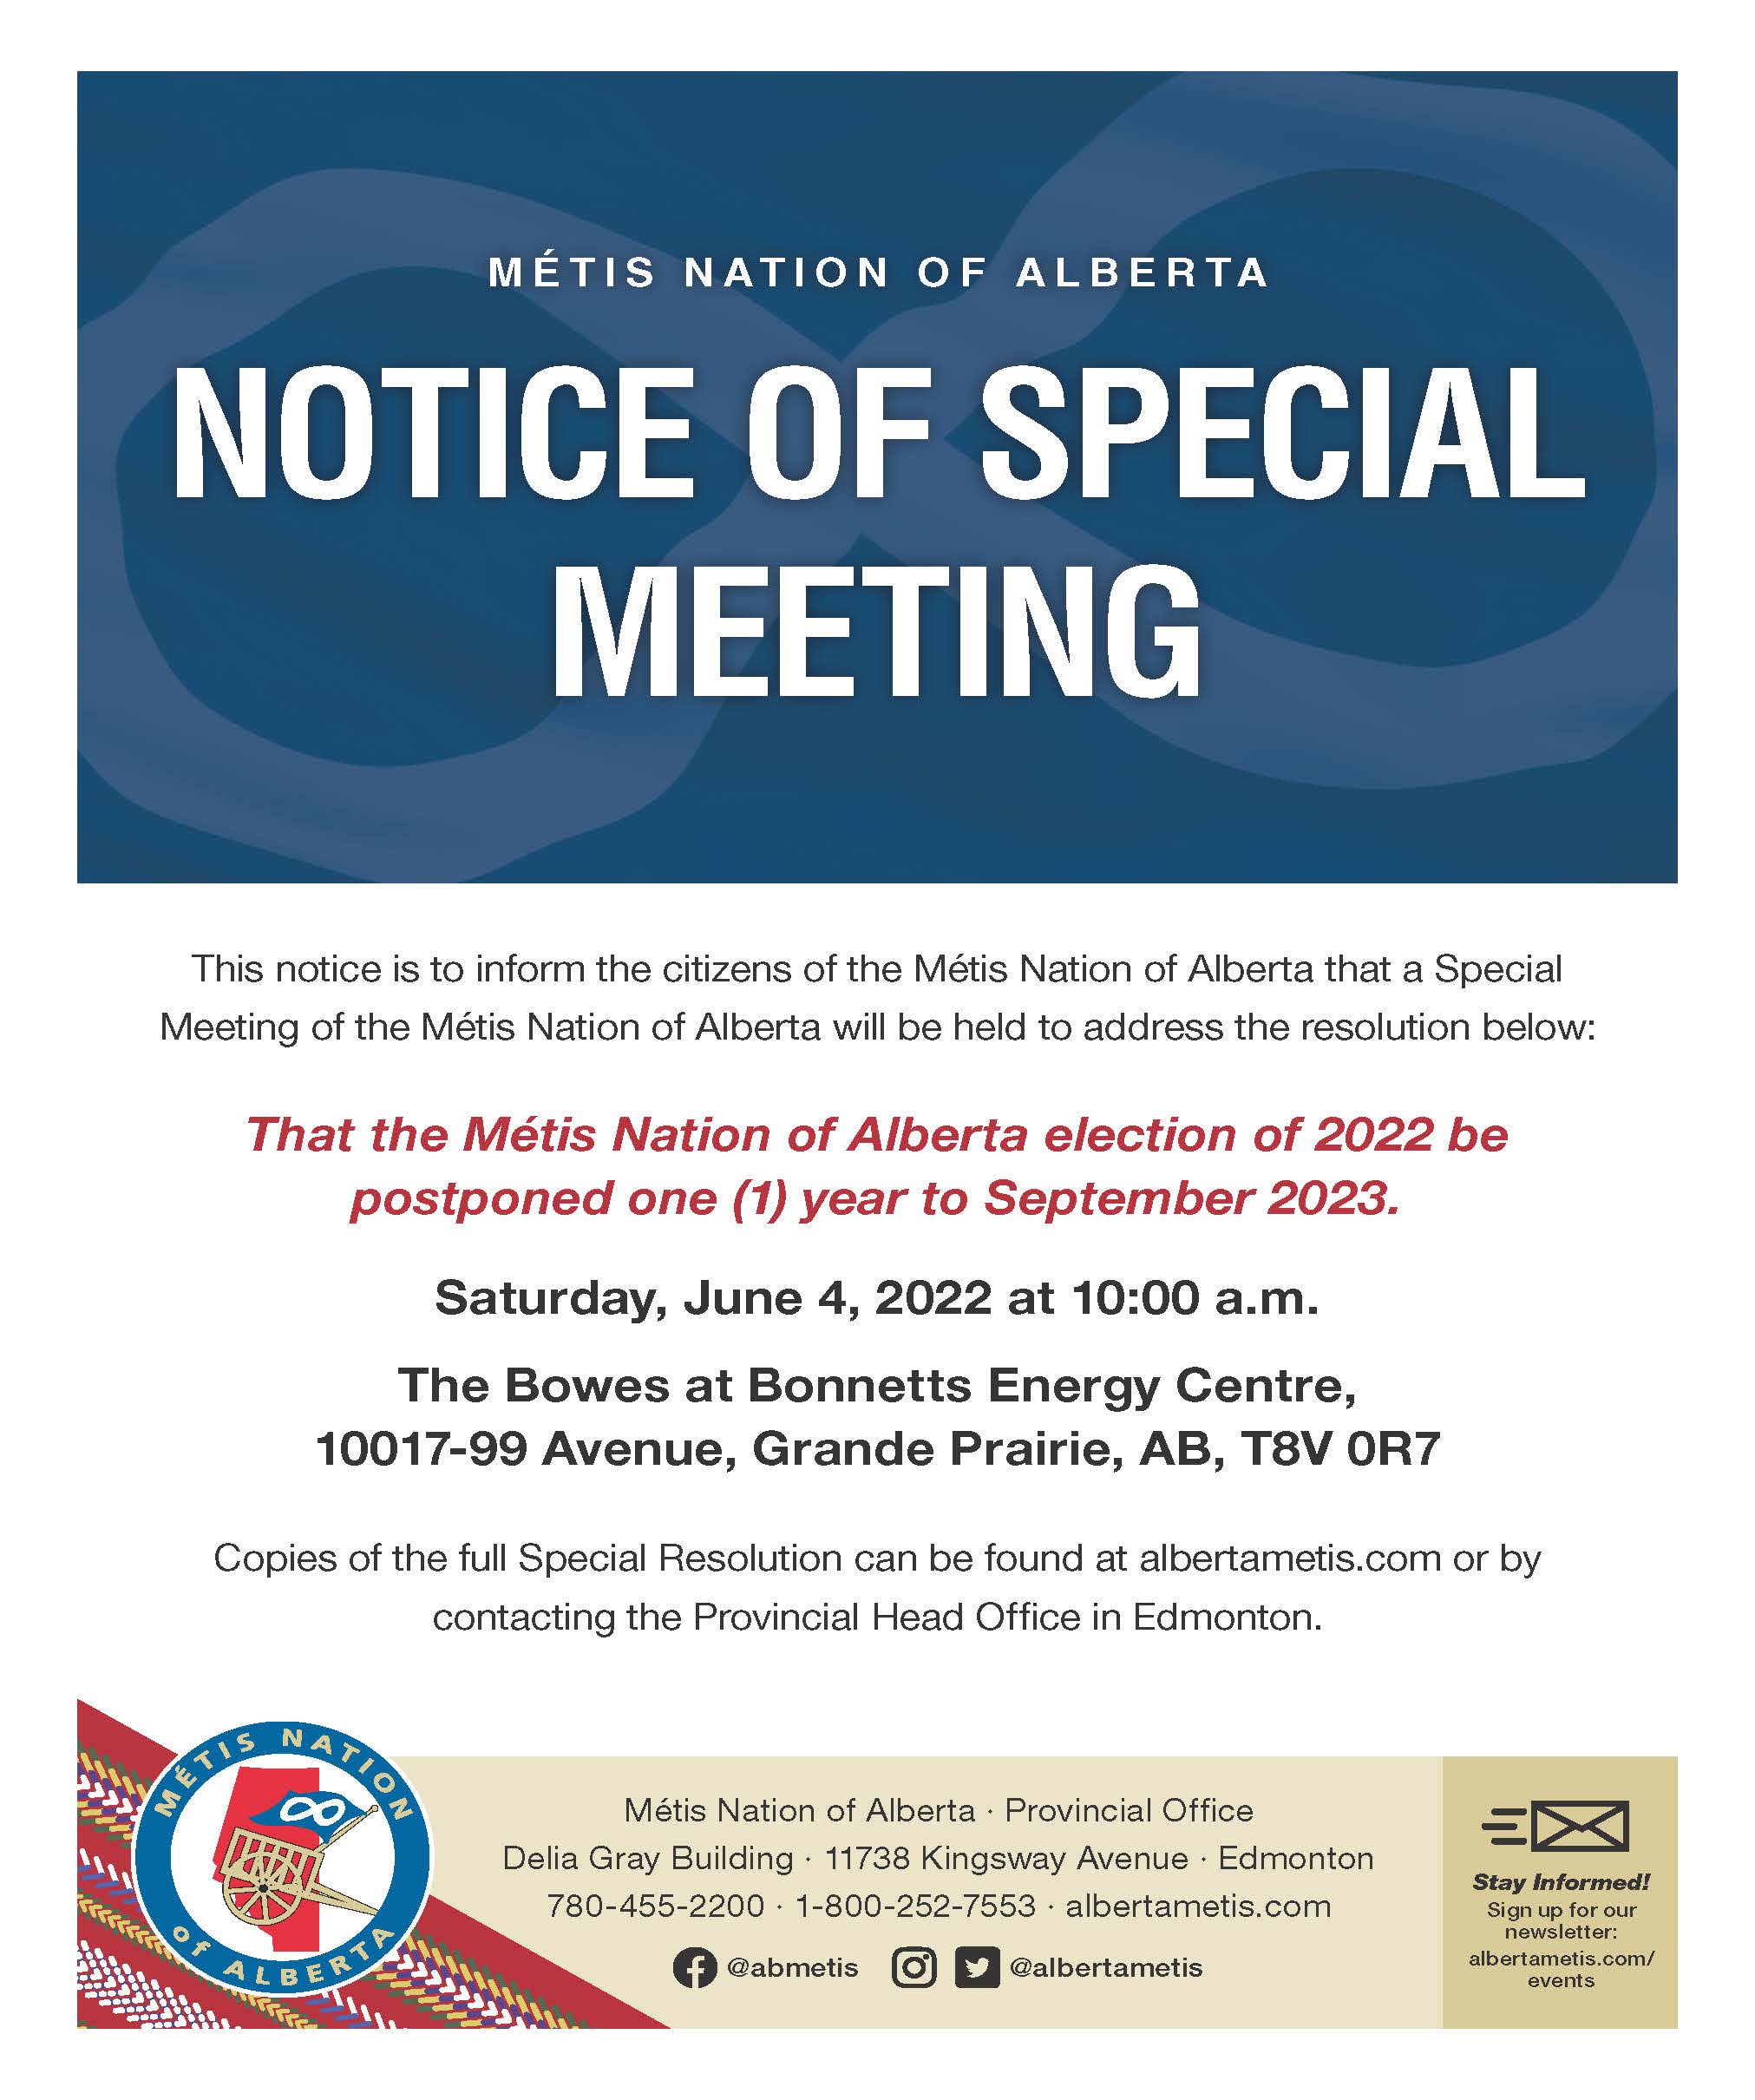 Metis Nation of Alberta Notice of Special Meeting. This notice is to inform the citizens of the Métis Nation of Alberta that a Special Meeting of the Métis Nation of Alberta will be held to address the resolution below: That the Metis Nation of Alberta election of 2022 be postponed (1) year to September 2023. Saturday, June 4, 2022 at 10:00 a.m. The Bowes at Bonnetts En ergy Centre, 10017-99 Avenue, Grande Prairie, AB, T8V 0R7. Copies of the full Special Resolution can be found at albertametis.com or by contacting the Provincial Office in Edmonton. 